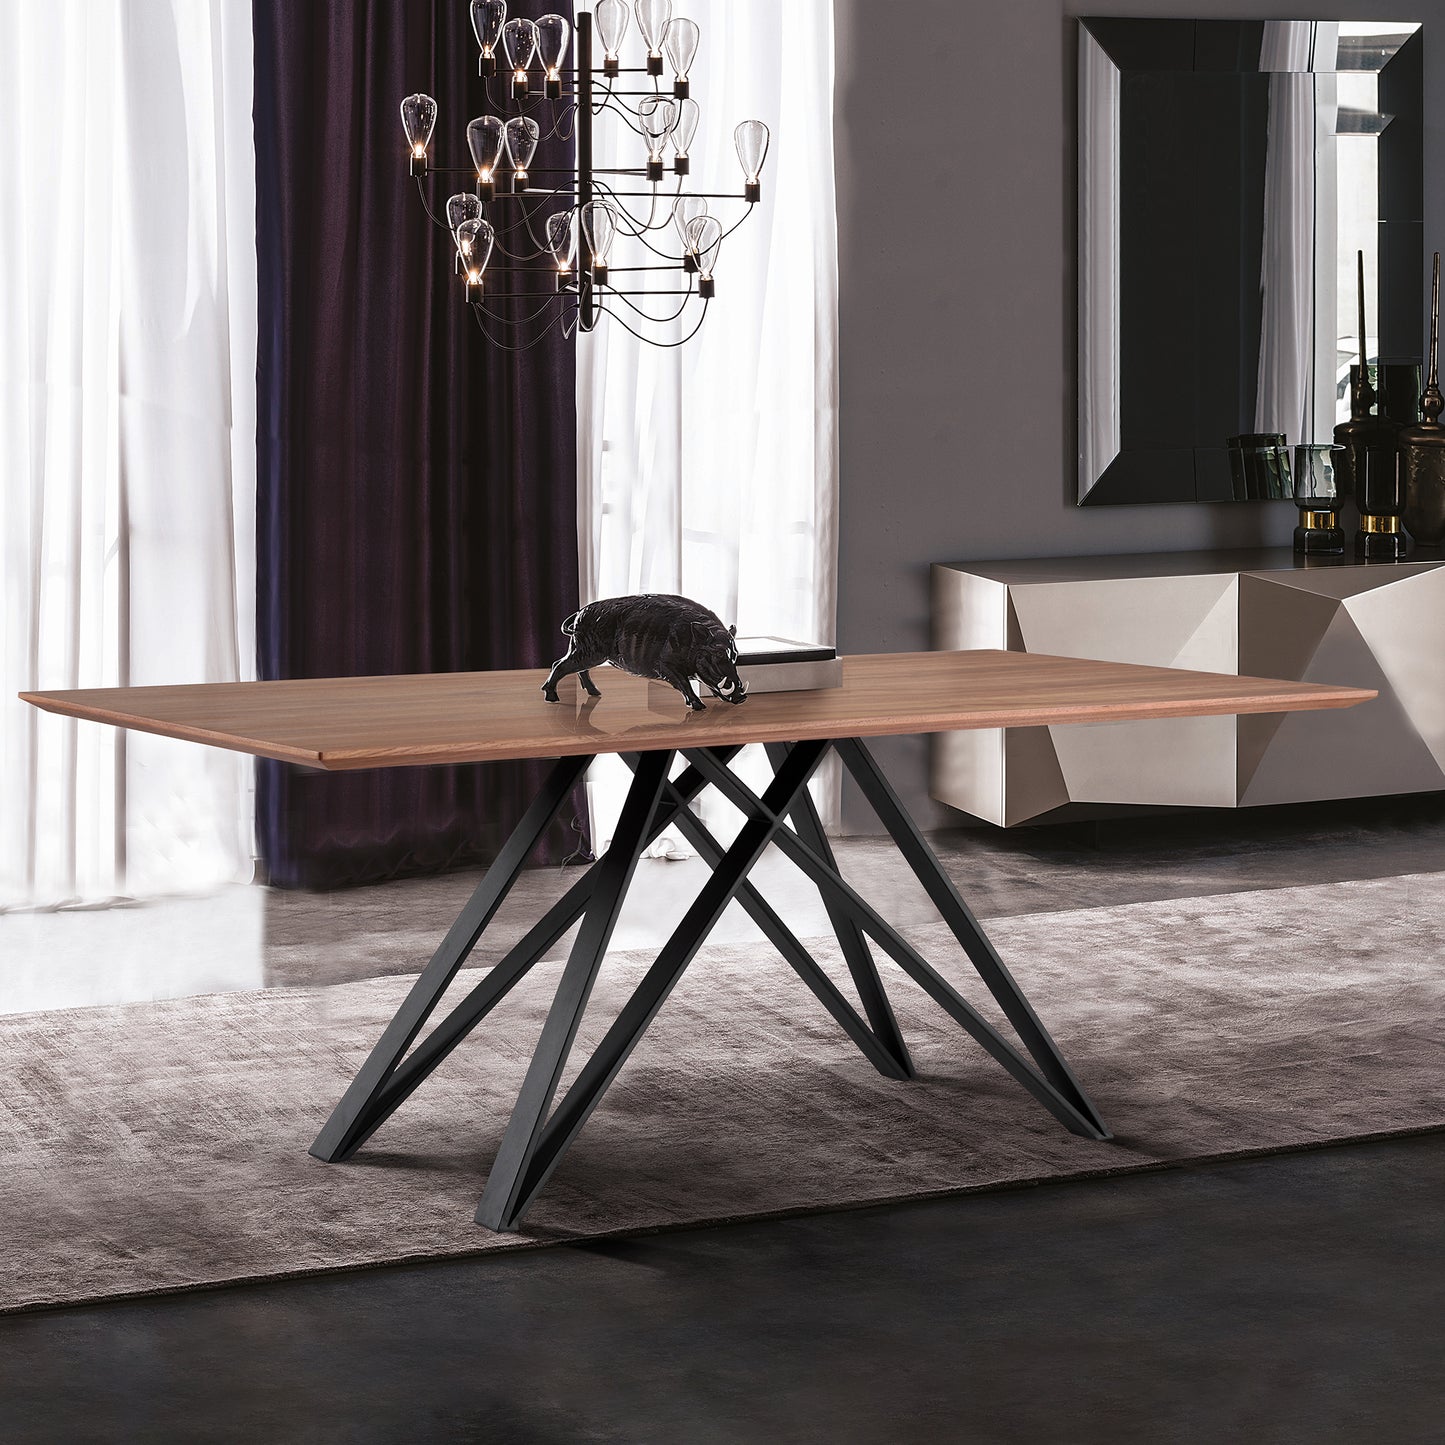 Modena Contemporary Dining Table in Matte Black Finish and Walnut Wood Top